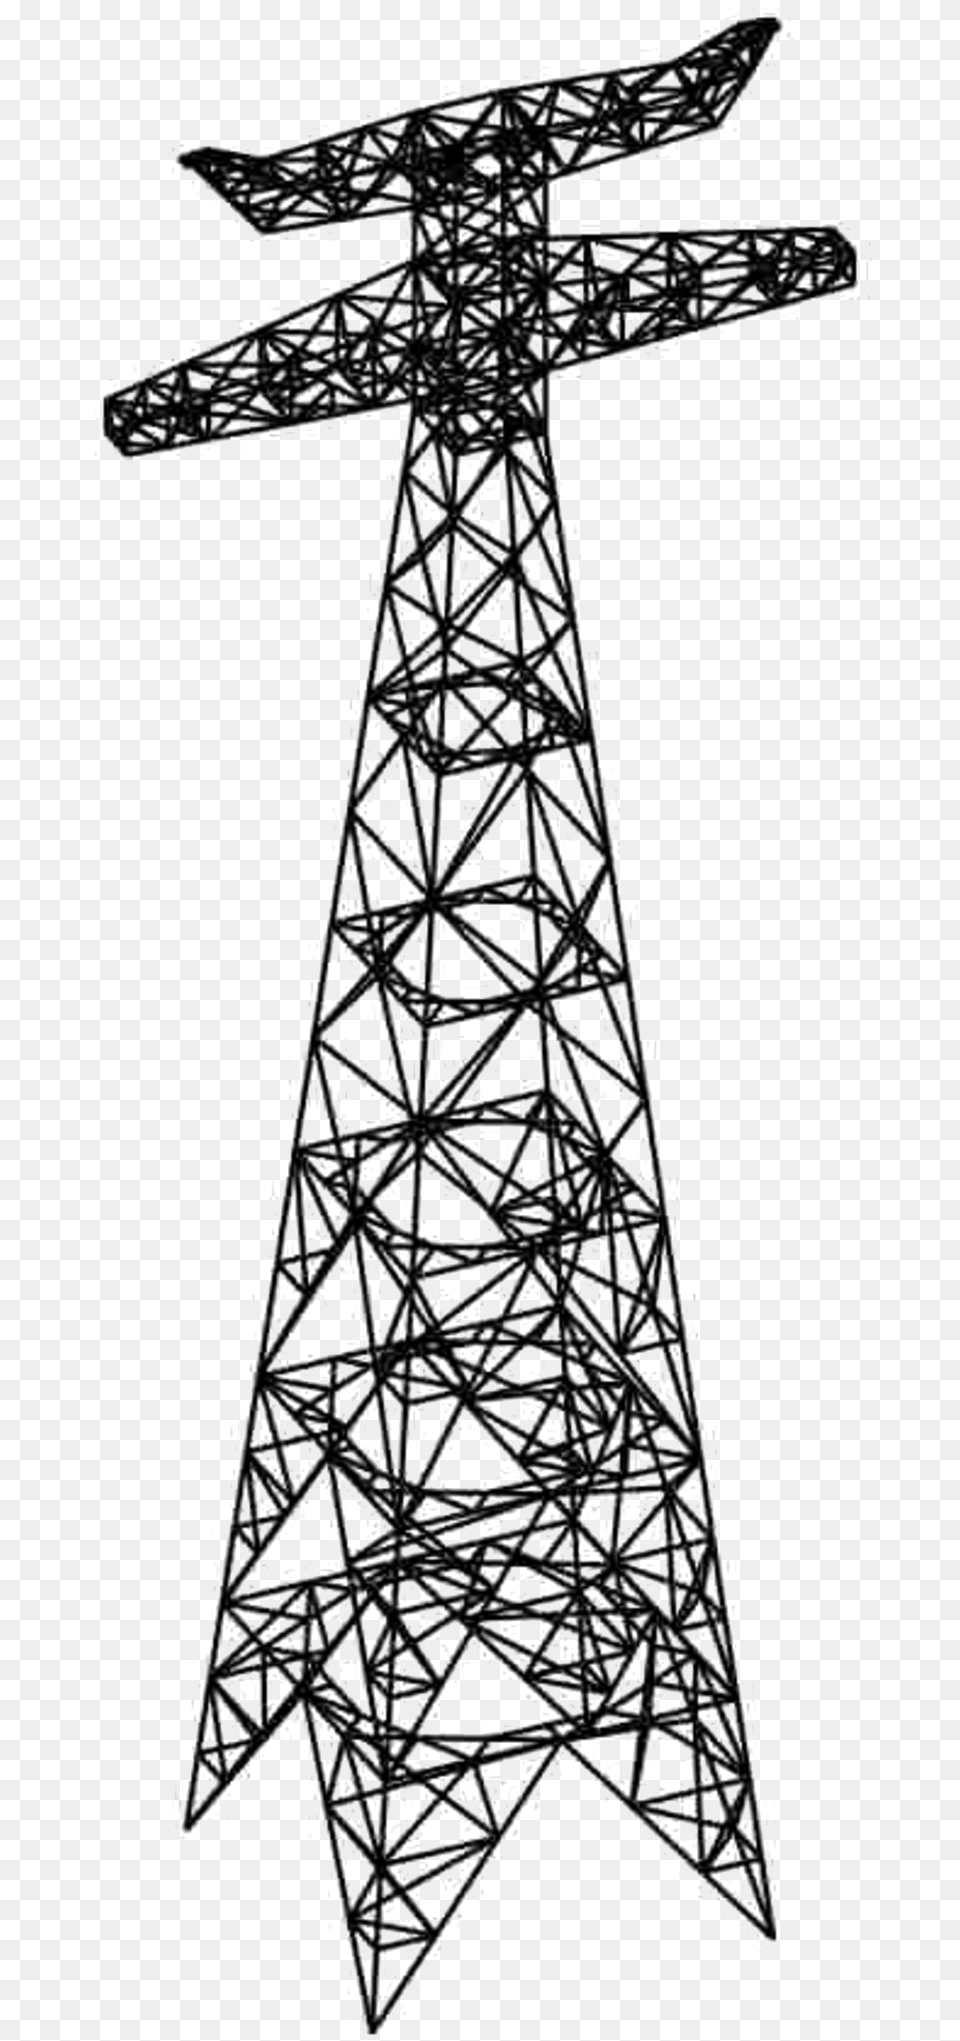 Transmission Tower Transparent Transmission Tower, Architecture, Building, Cable, Electric Transmission Tower Free Png